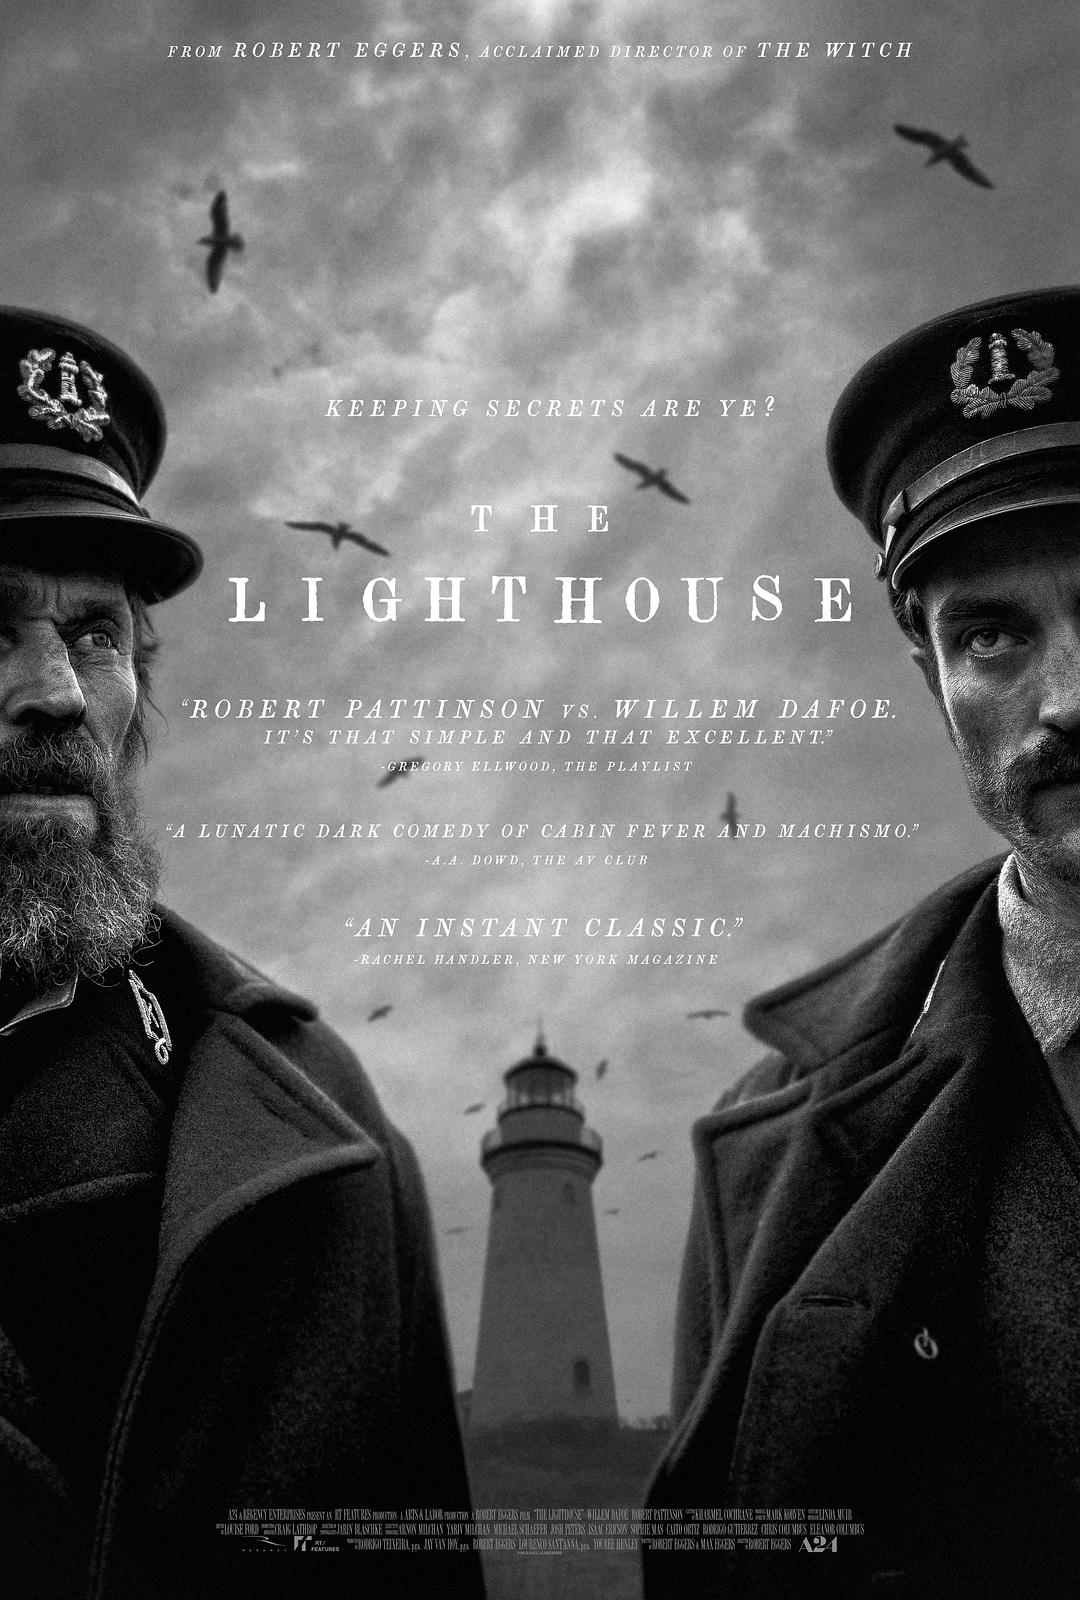  The.Lighthouse.2019.1080p.BluRay.AVC.DTS-HD.MA.5.1-LAZERS 44.95GB-1.png